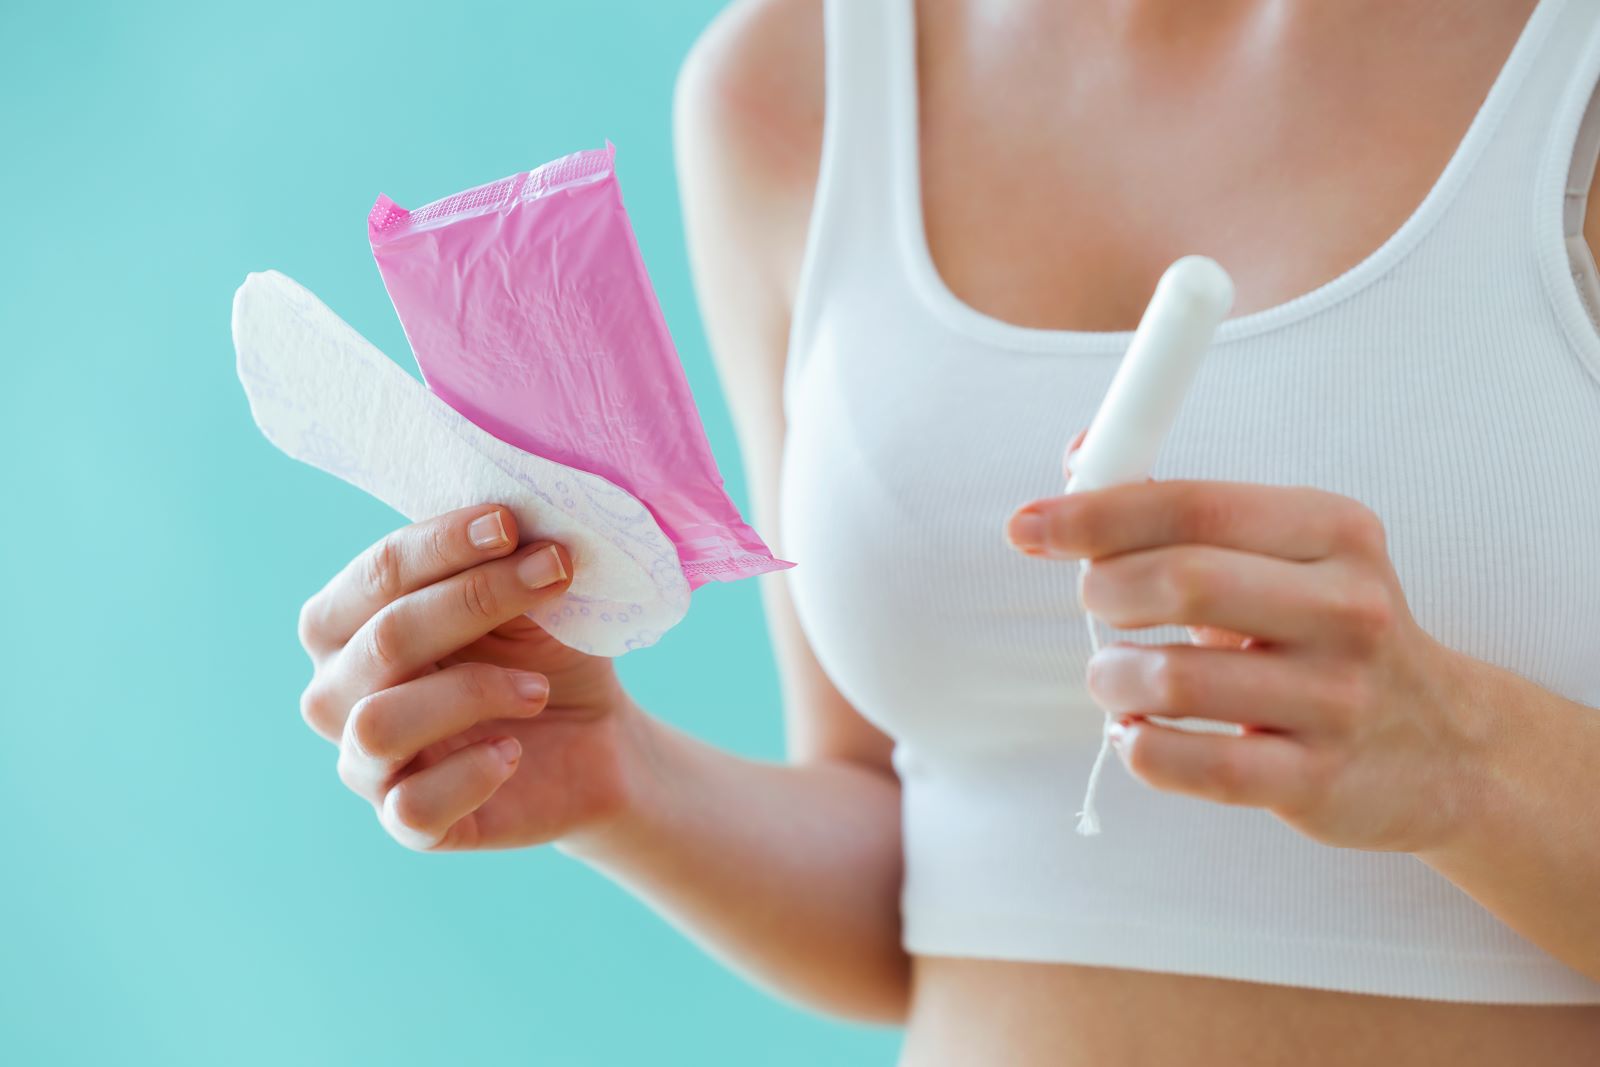 The Newest Shortage - Tampons - Raises Medical Concerns